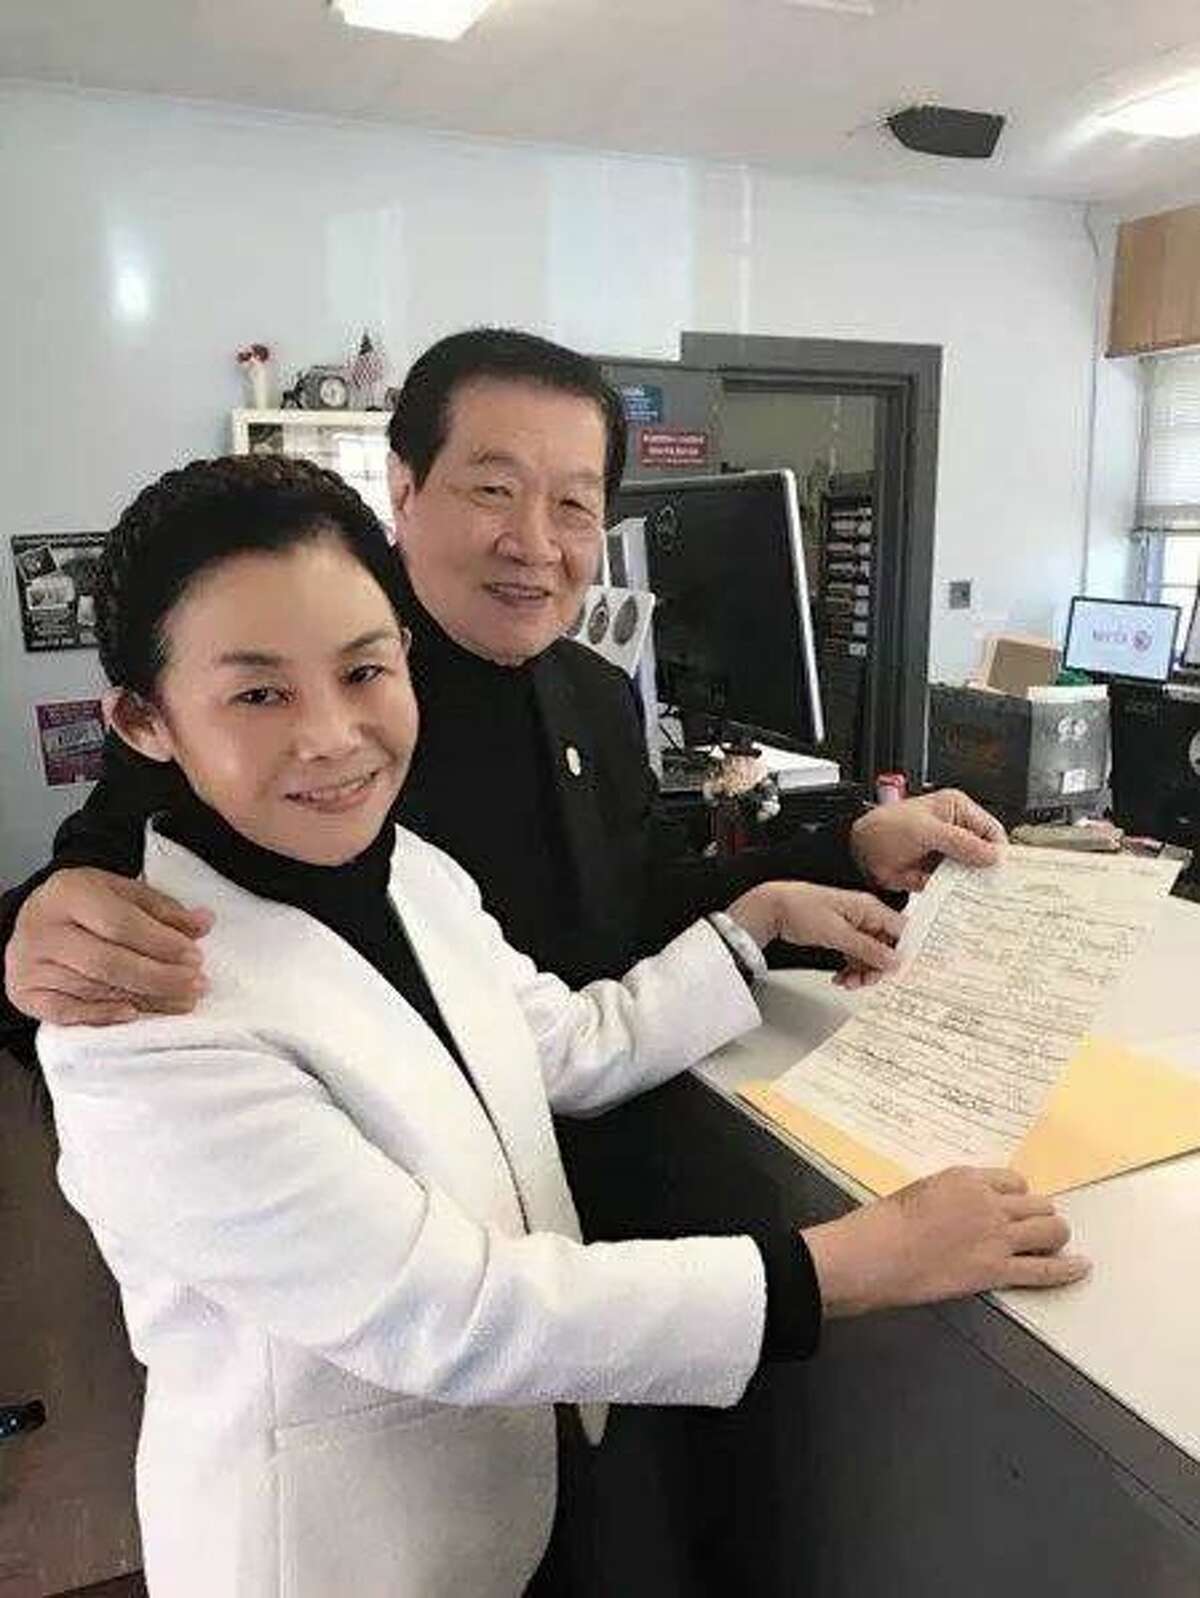 Renowned Connecticut forensic scientist Henry Lee to tie the knot